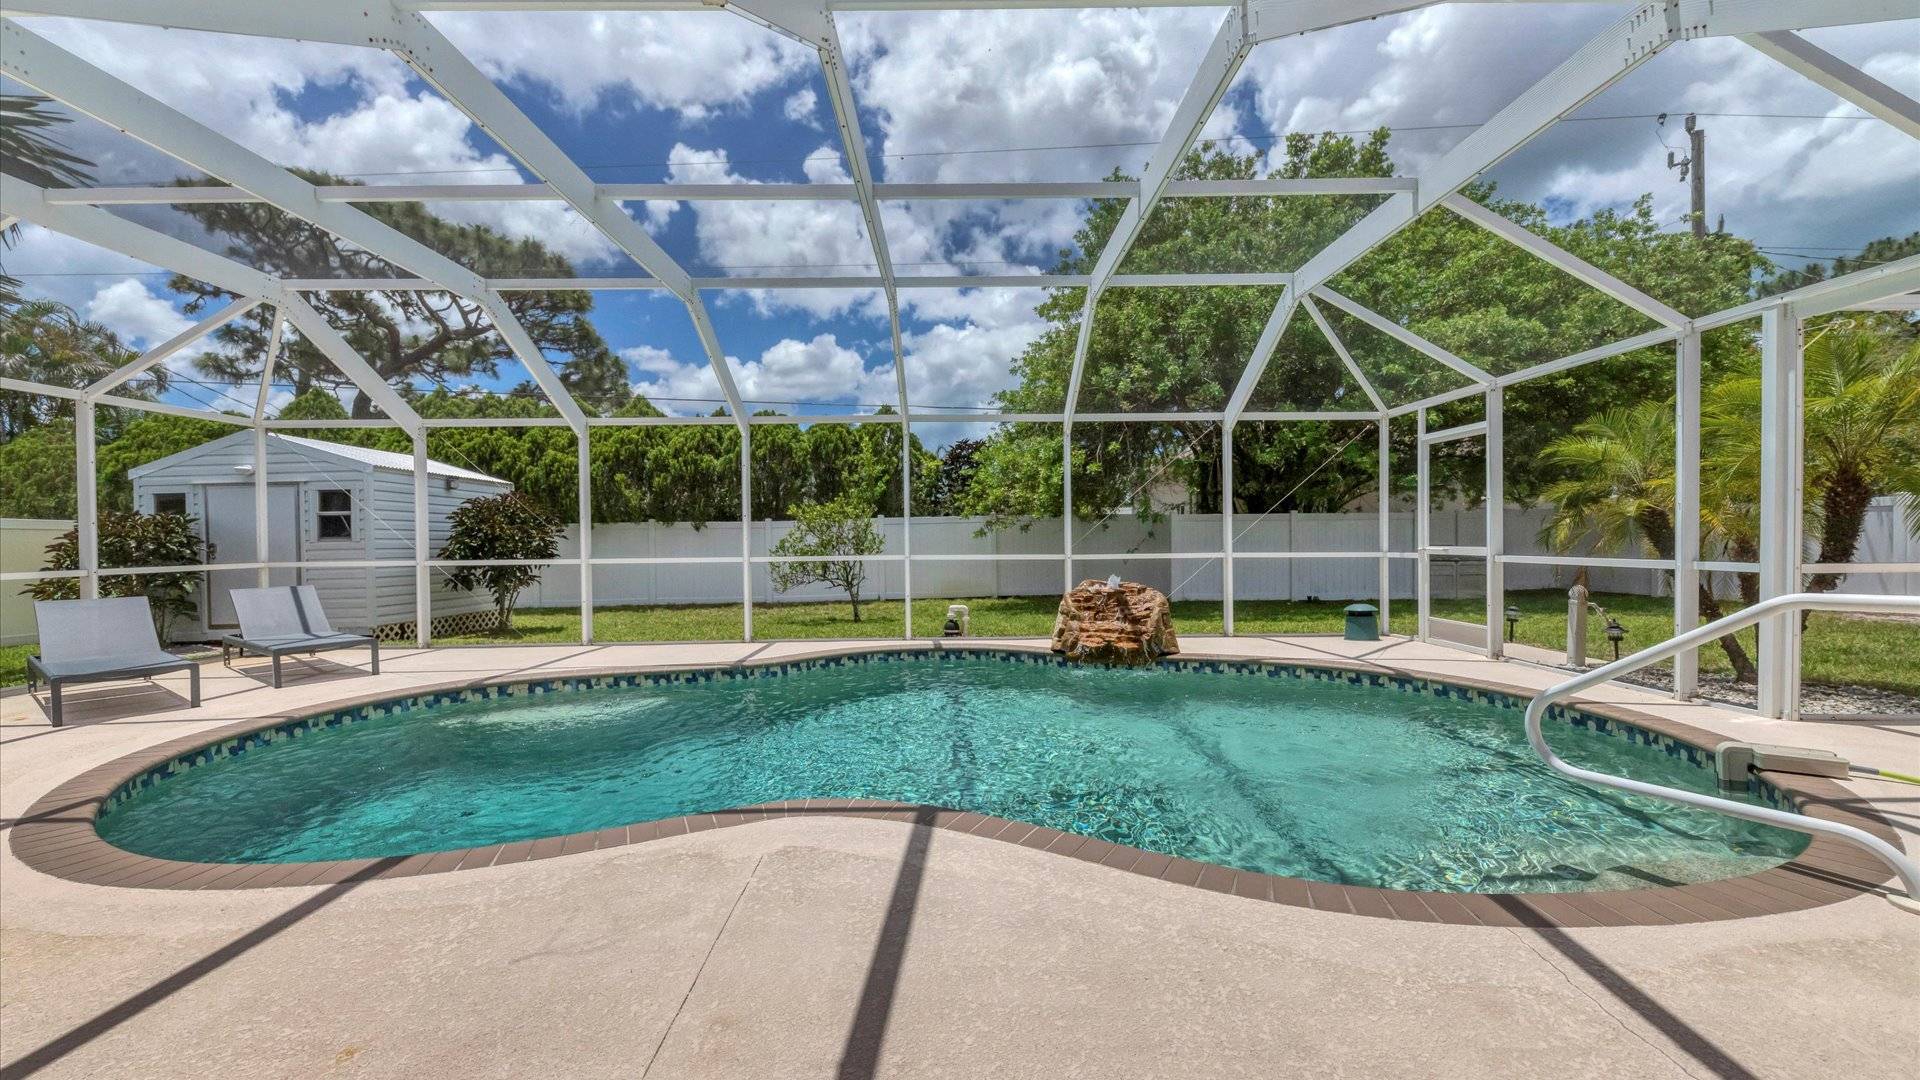 Gorgeous and sunny outdoor space with lovely pool and private backyard